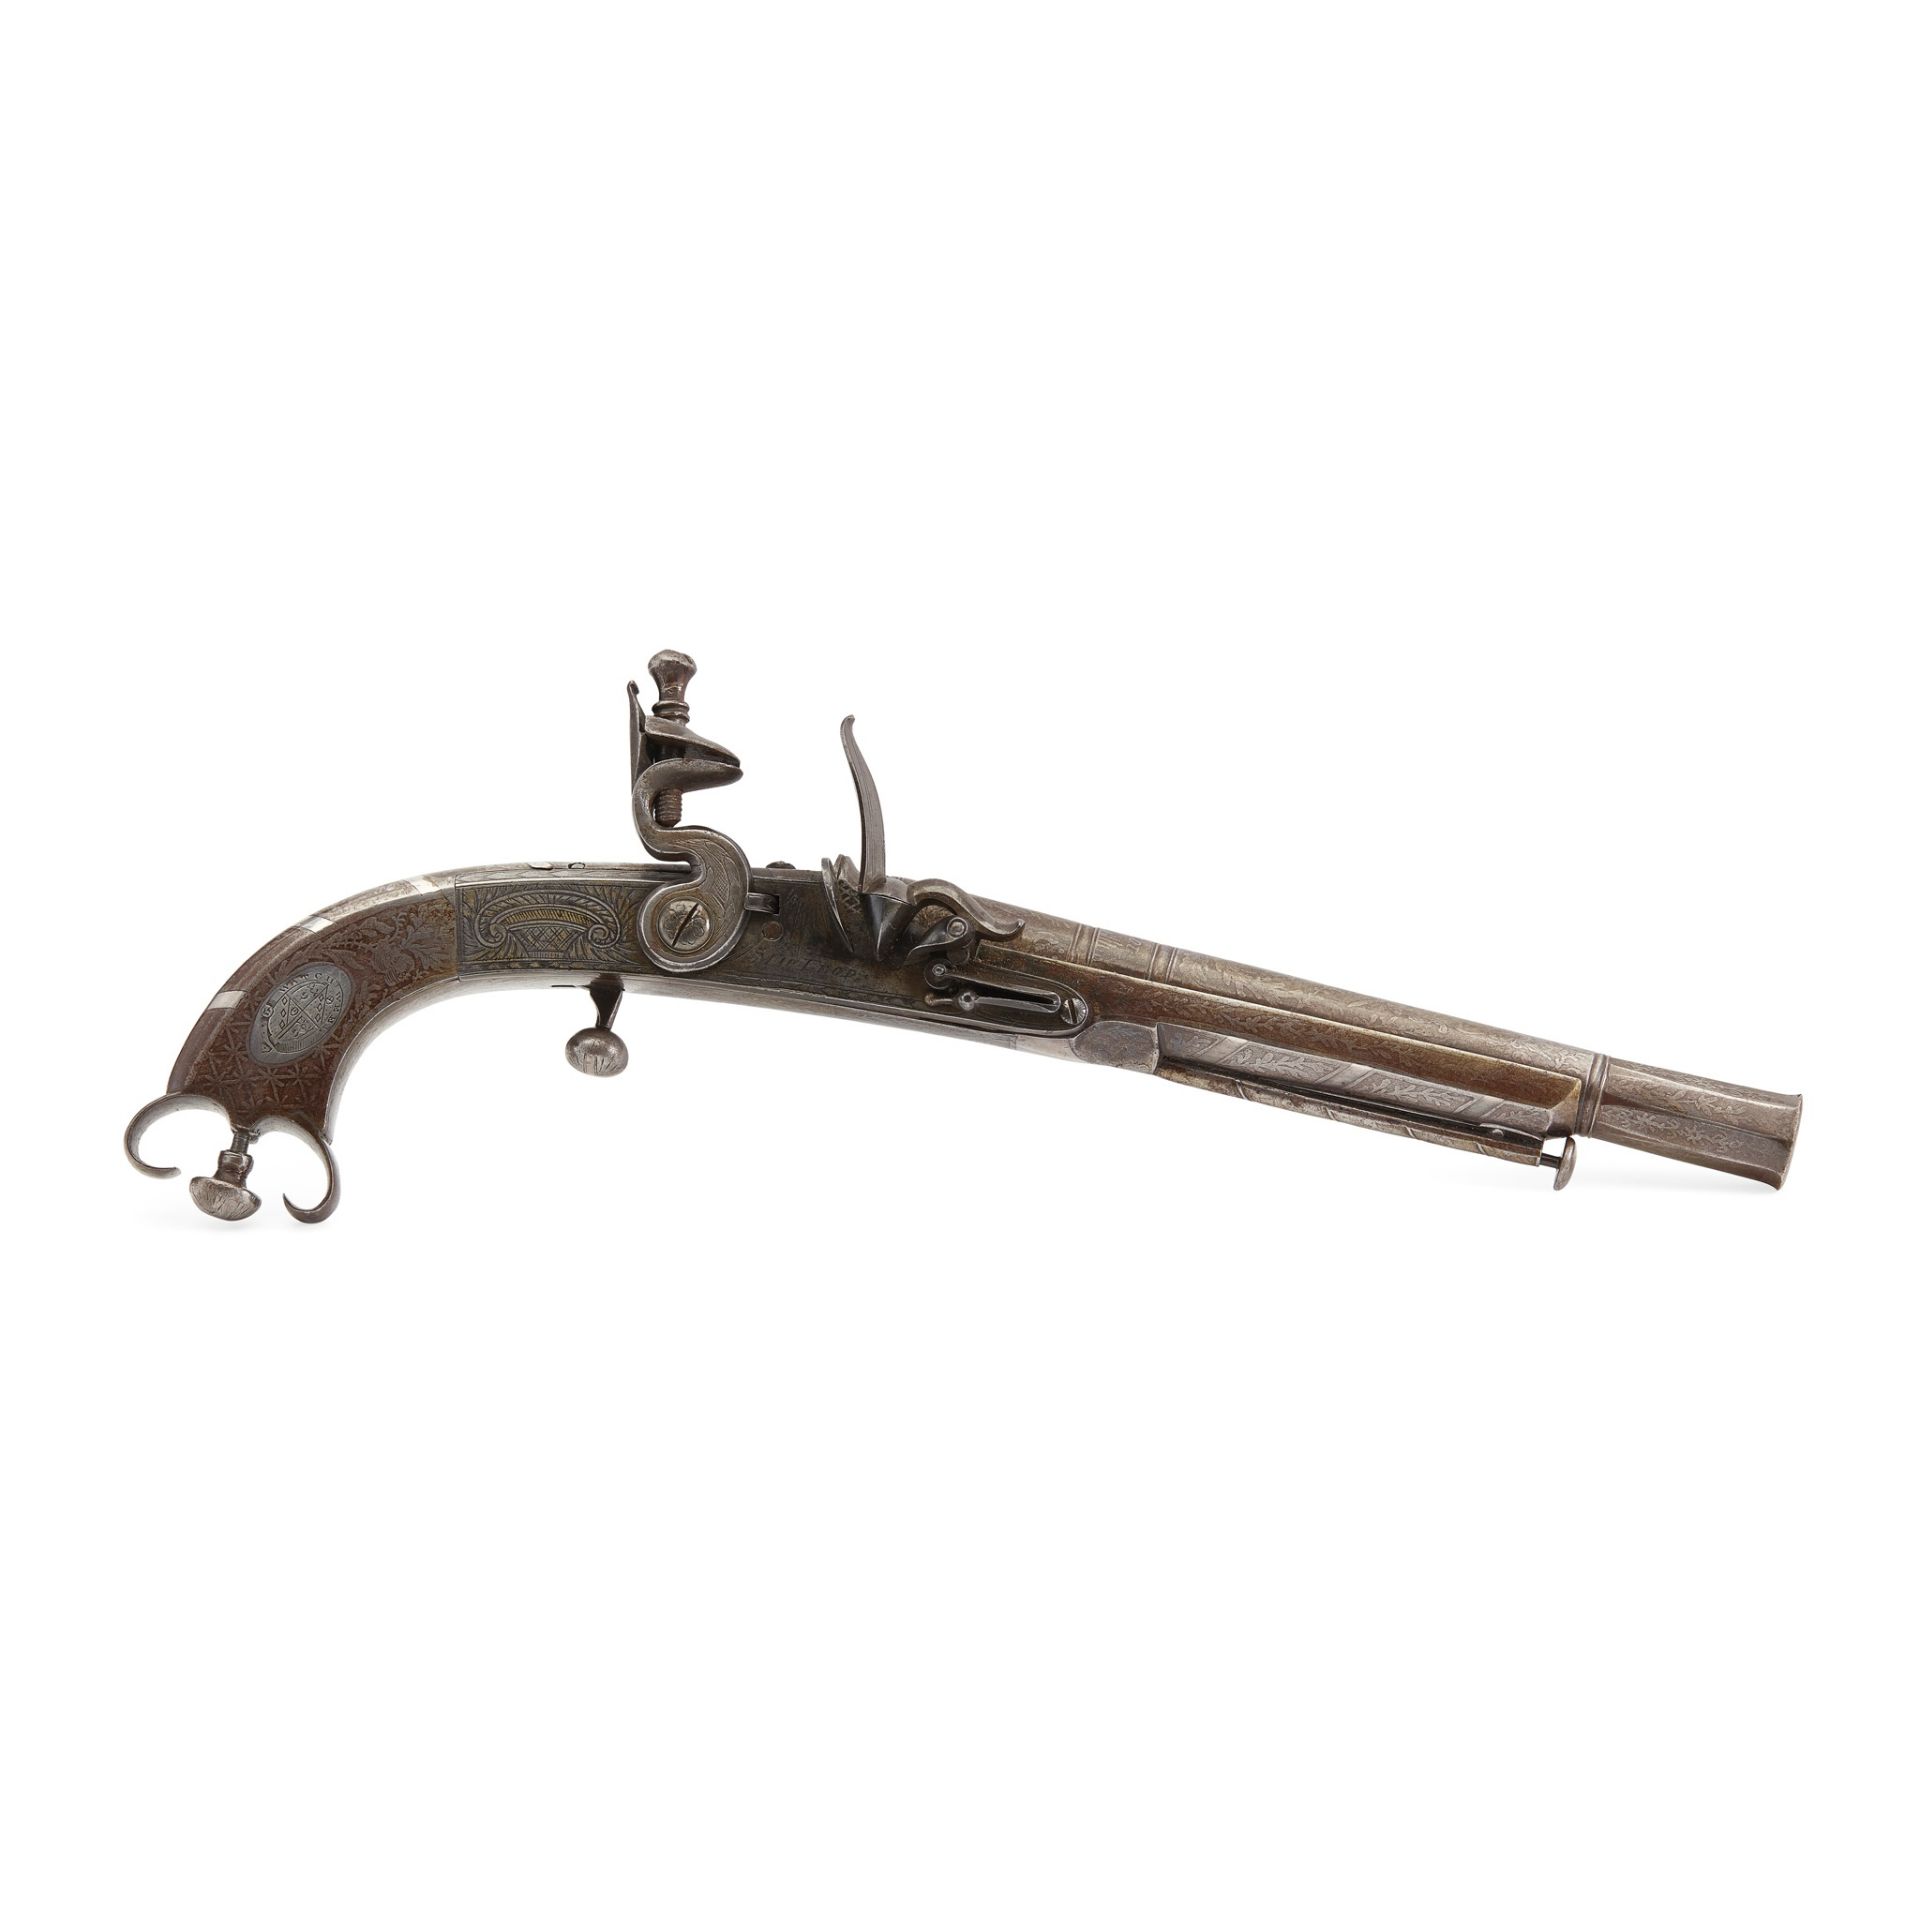 THE SCOTT OF ABBOTSFORD PISTOL AN IMPORTANT FINE EARLY 19TH CENTURY SILVER MOUNTED STEEL SCOTTISH